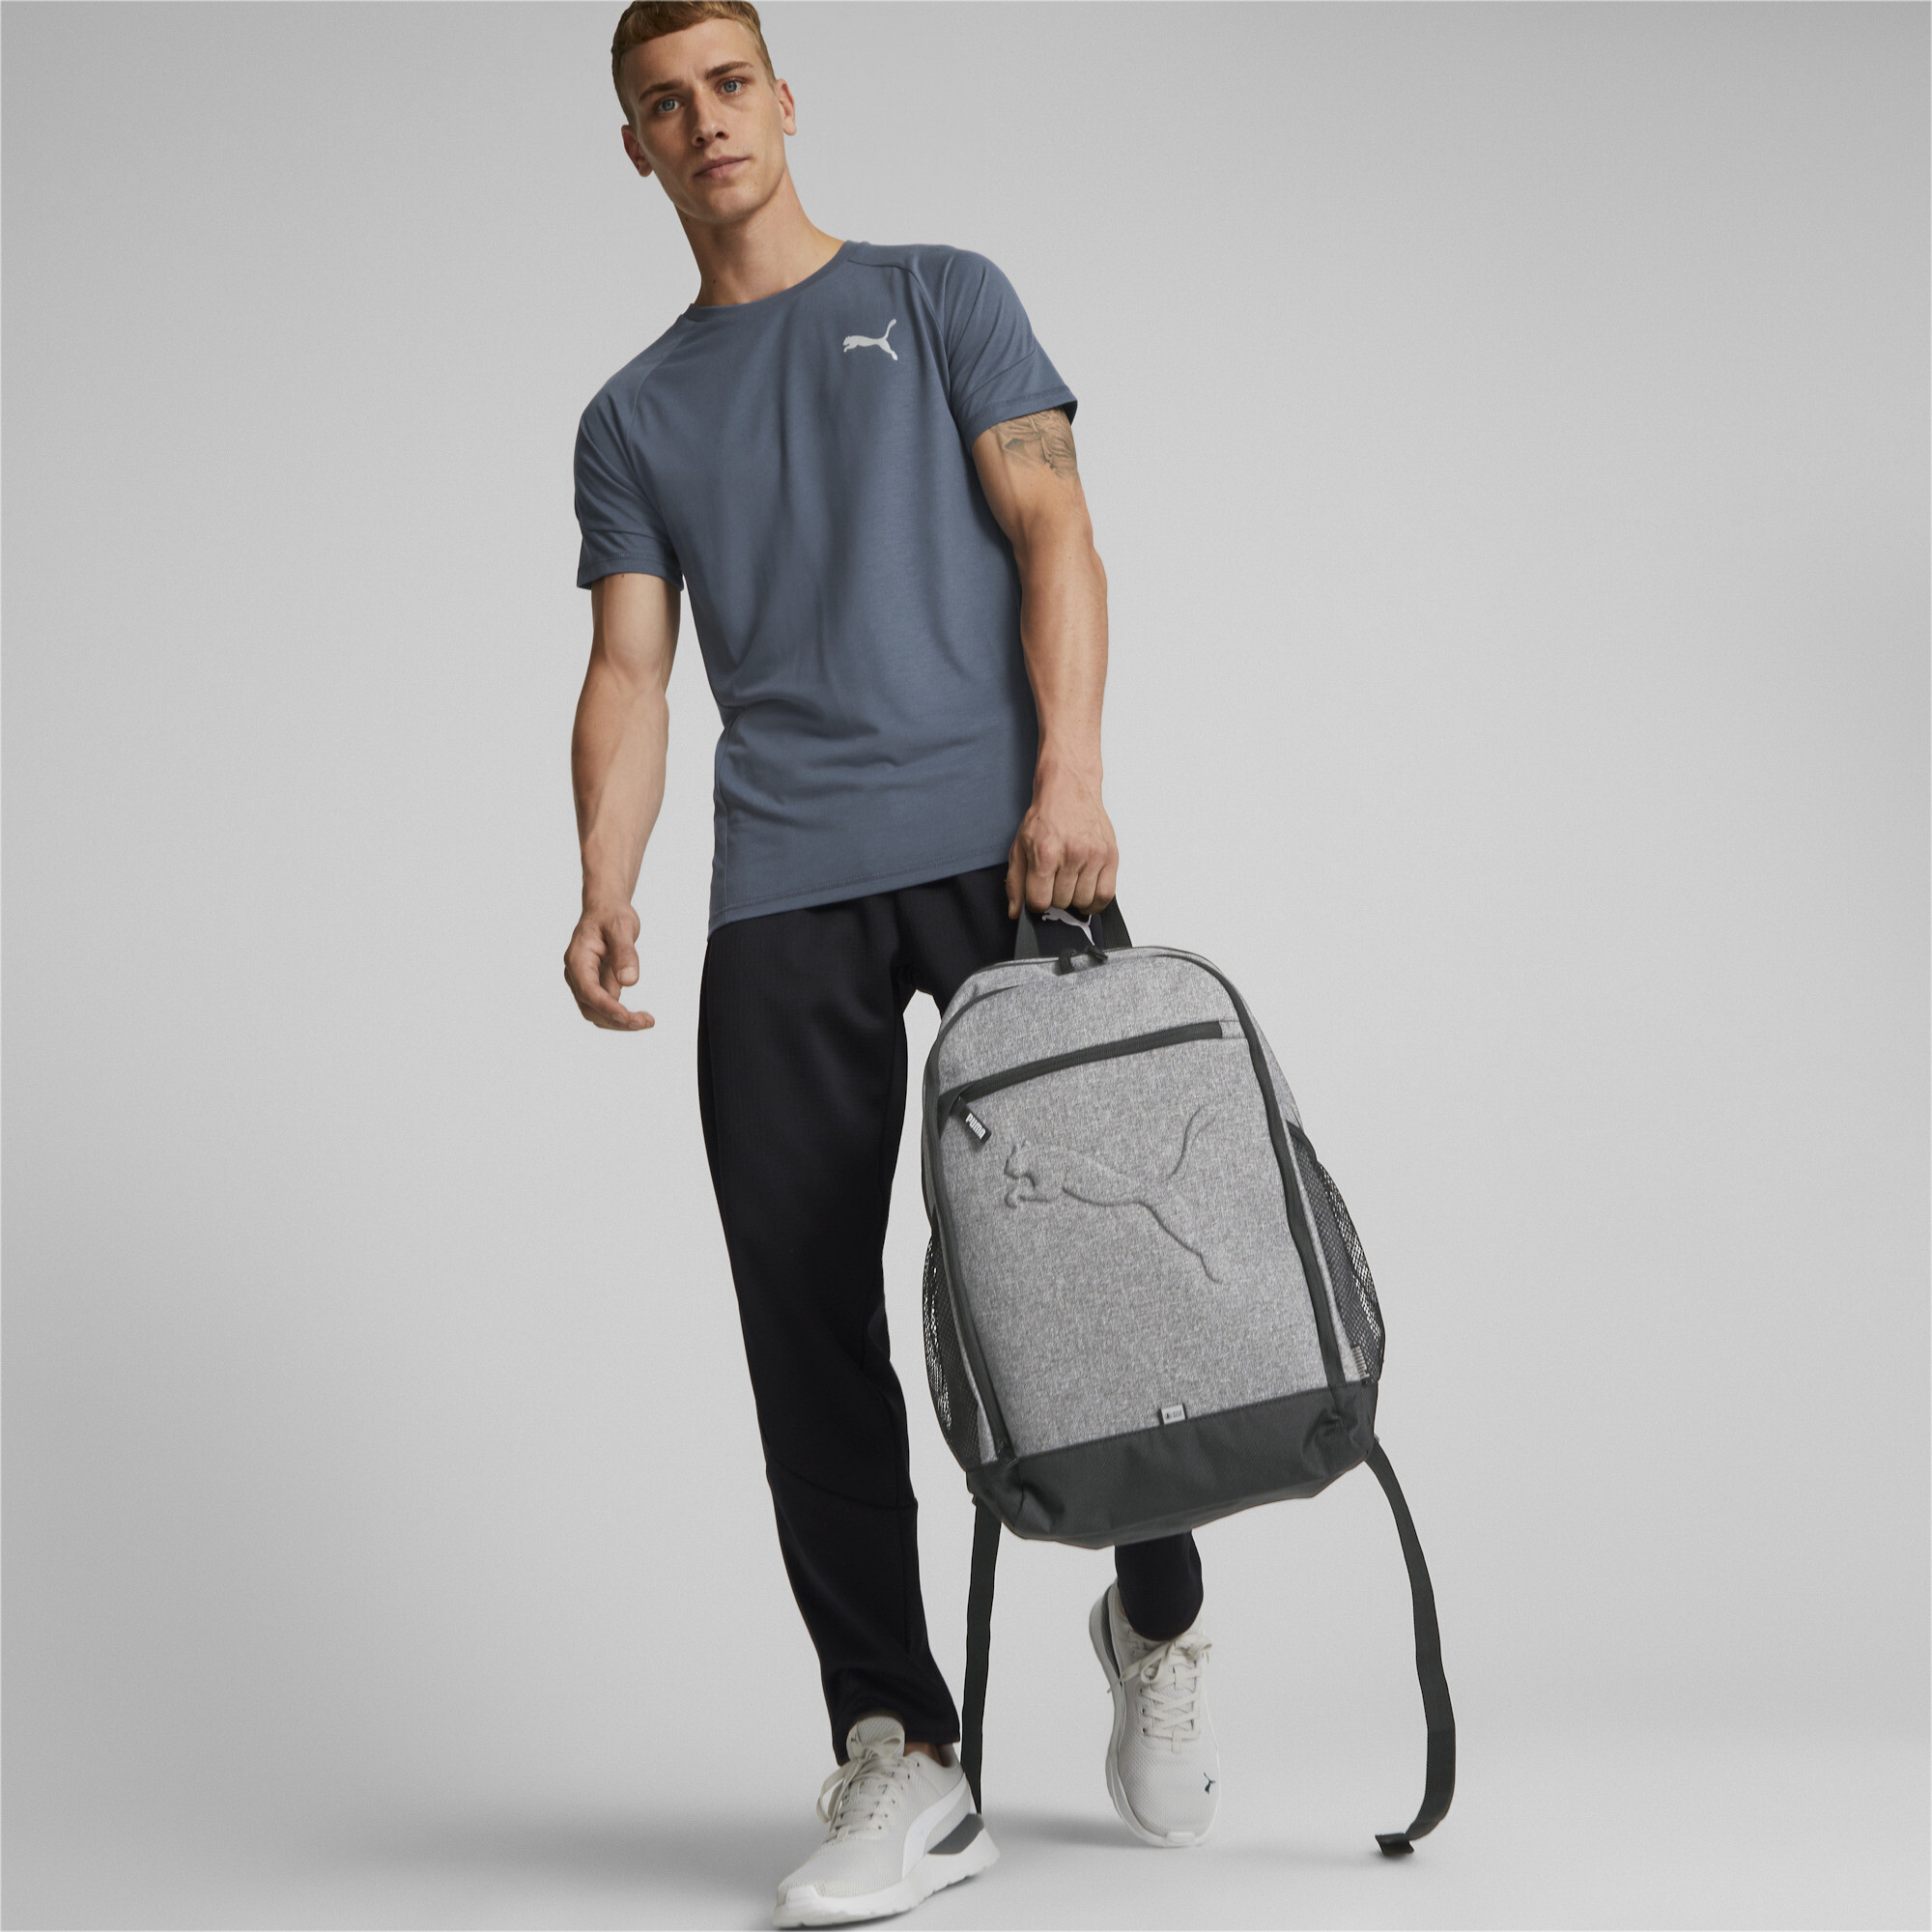 Puma Buzz Backpack, Gray, Accessories